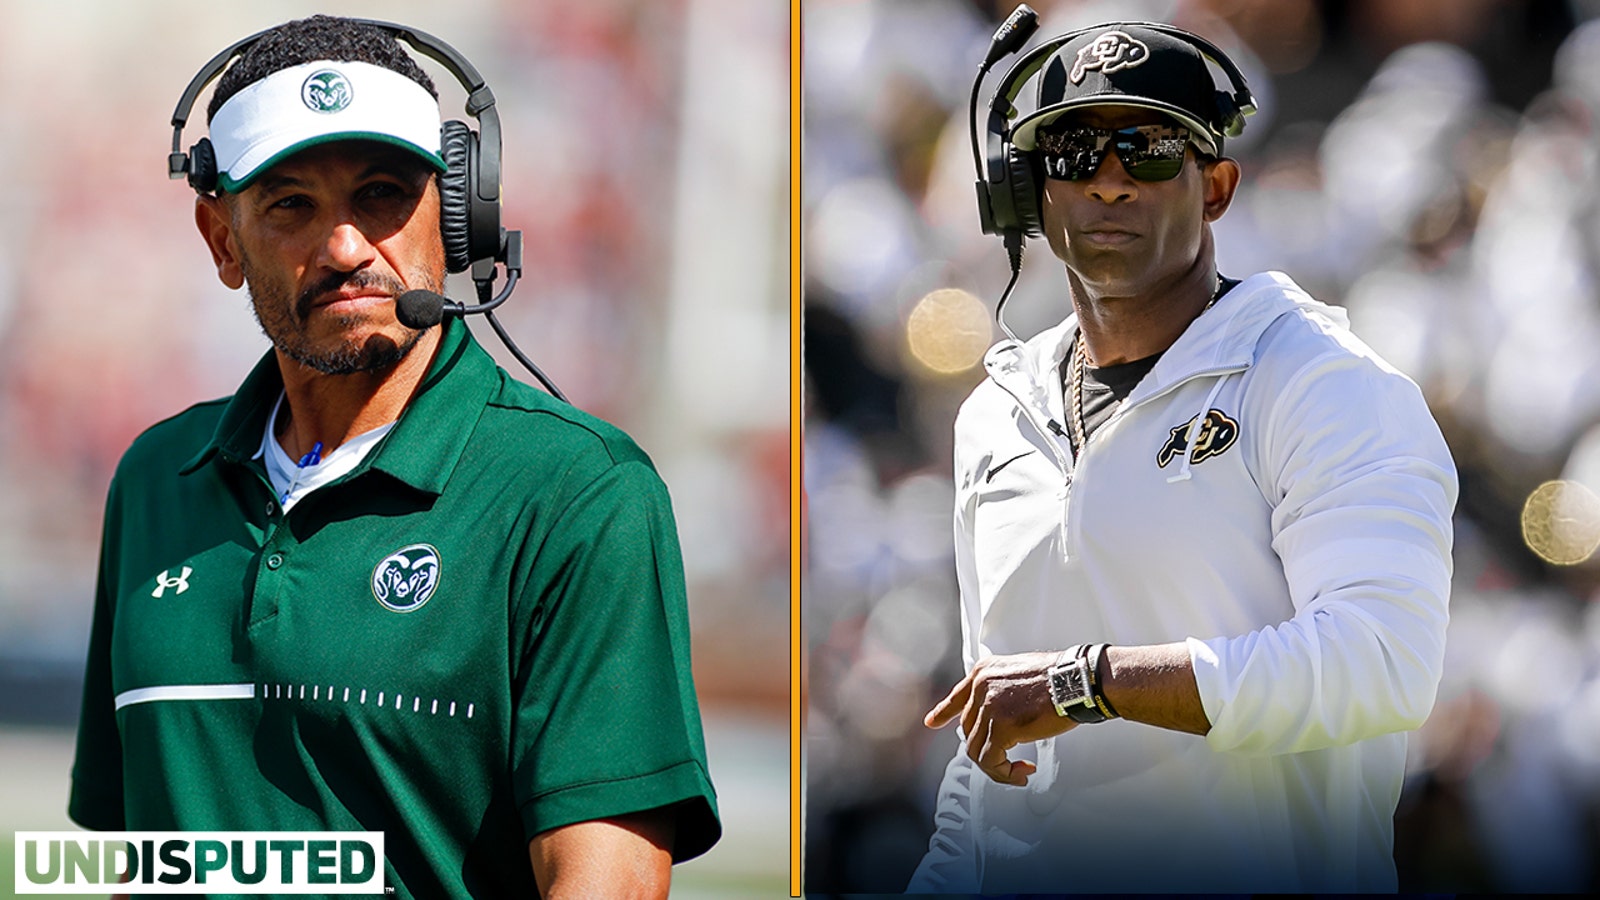 Deion Sanders says Jay Norvell 'made it personal' ahead of Colorado vs. Colorado St.